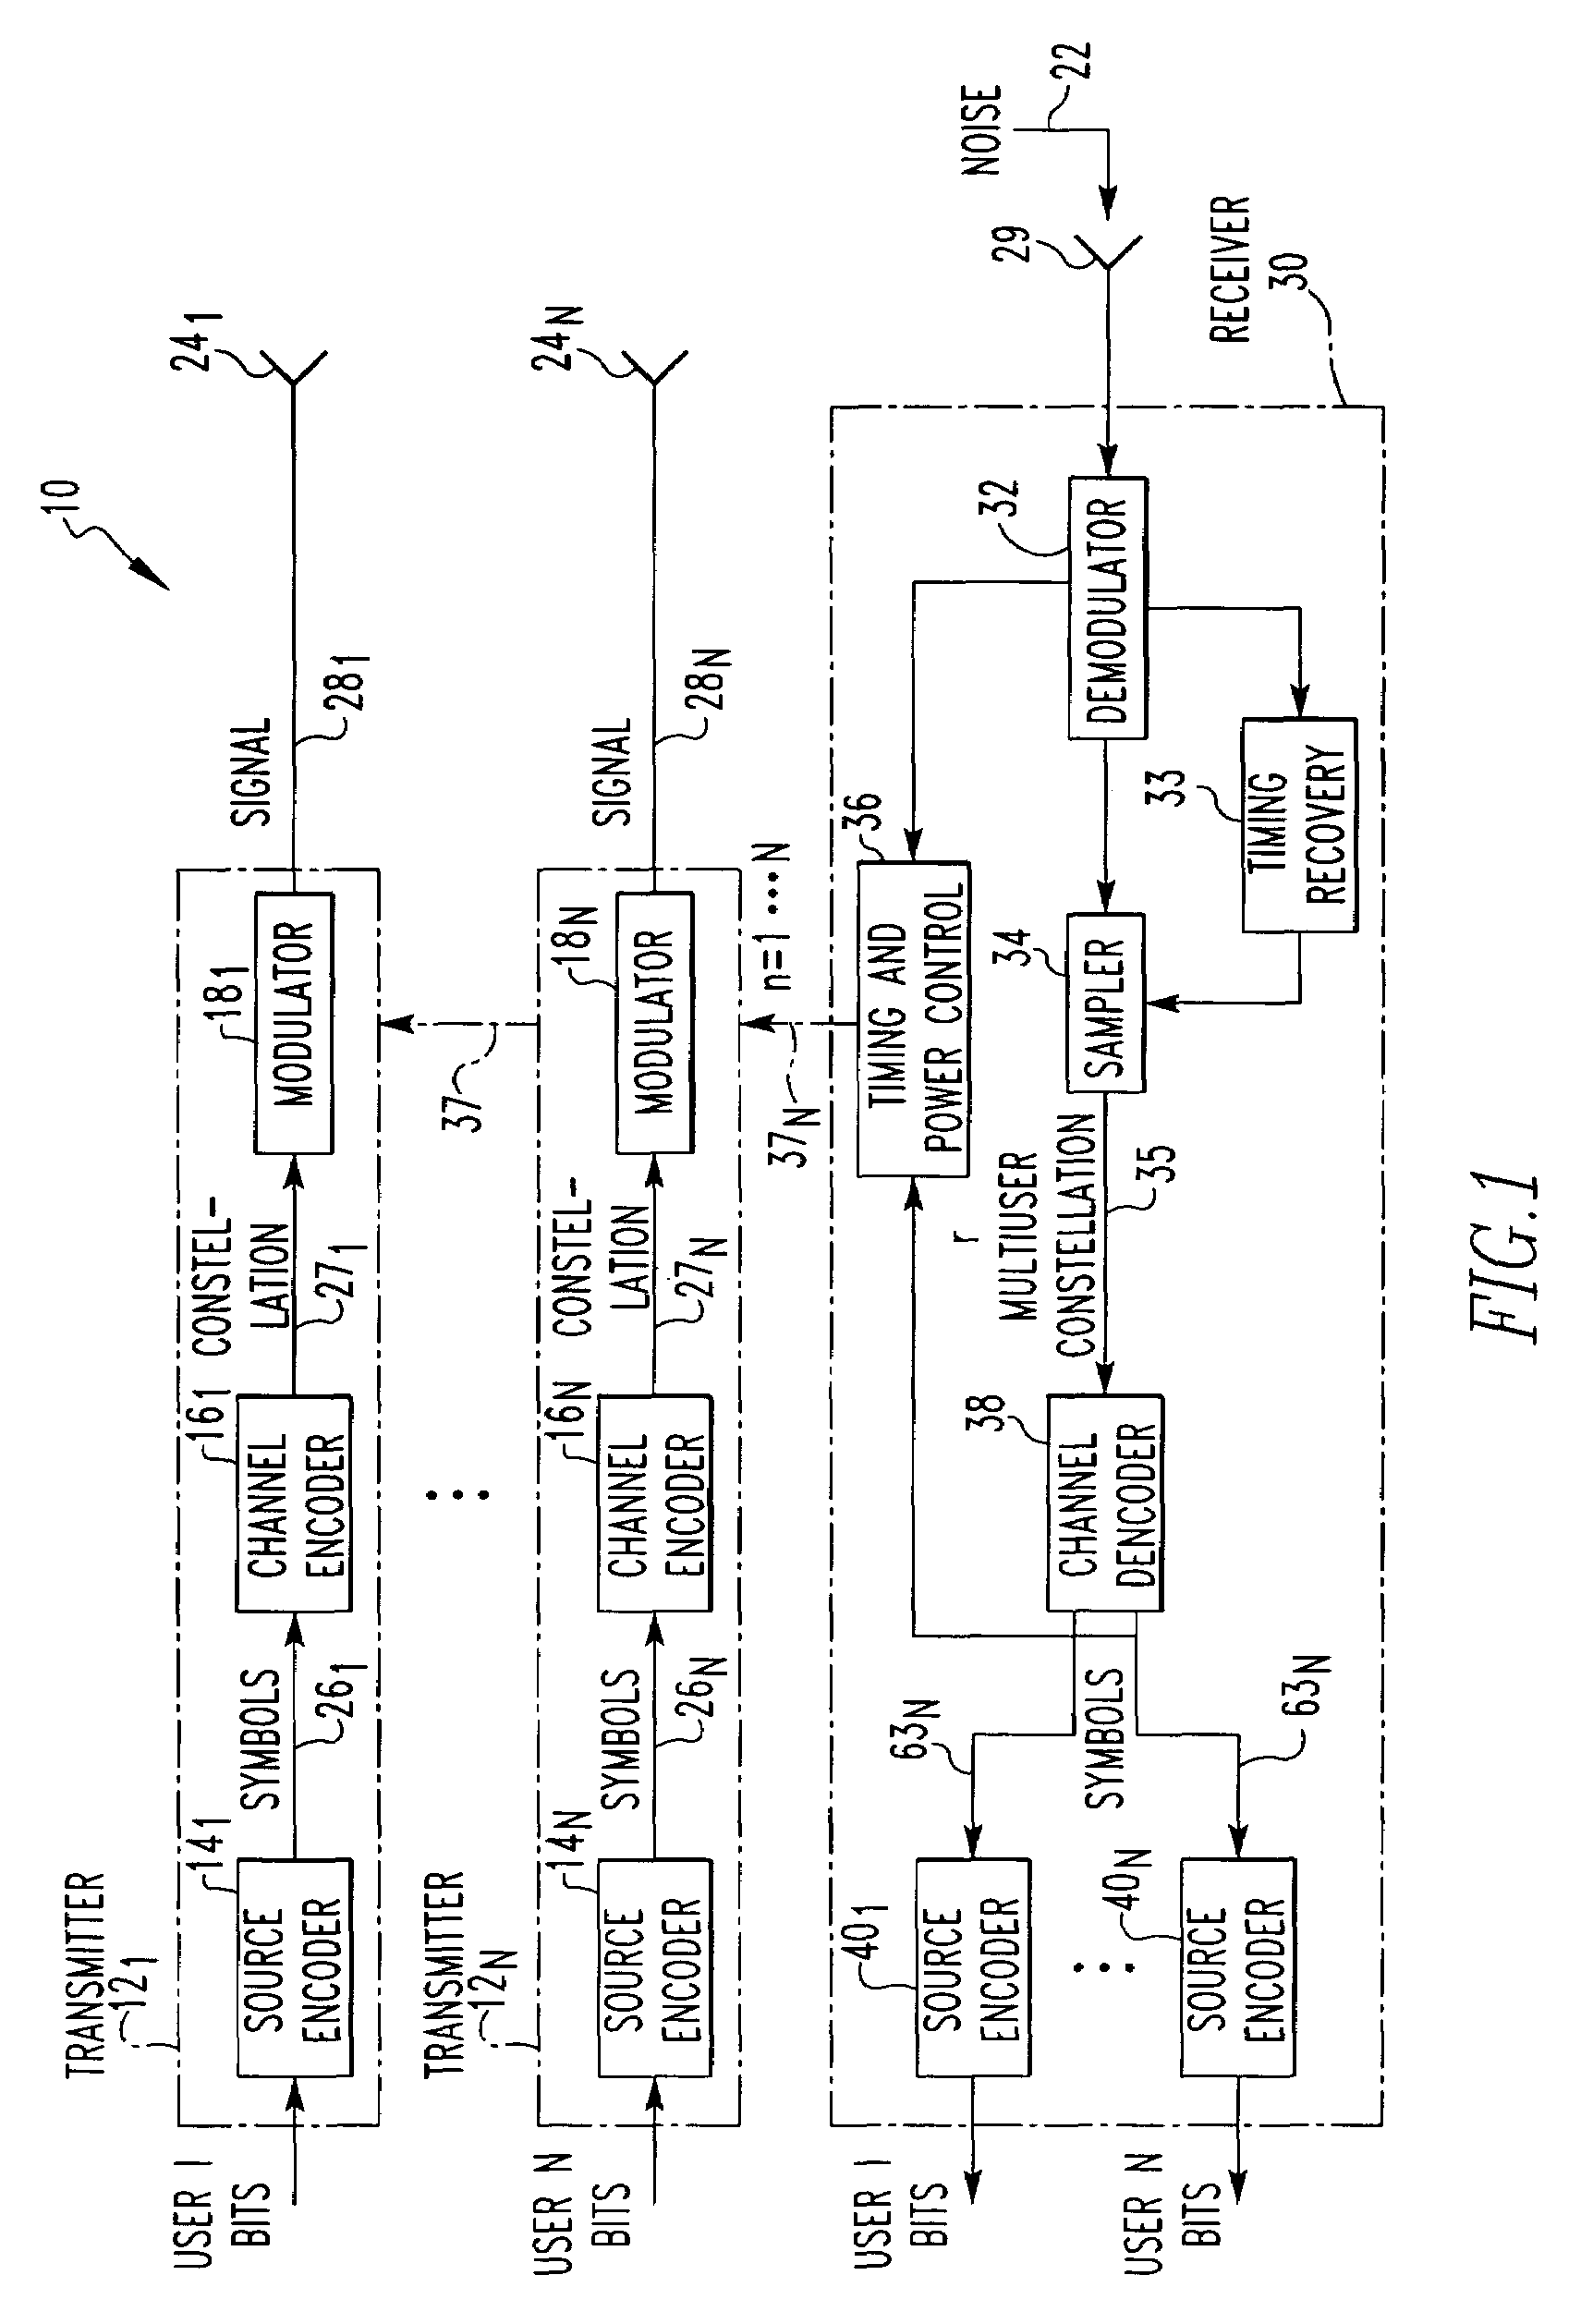 Efficient and optimal channel encoding and channel decoding in a multiple access communications system